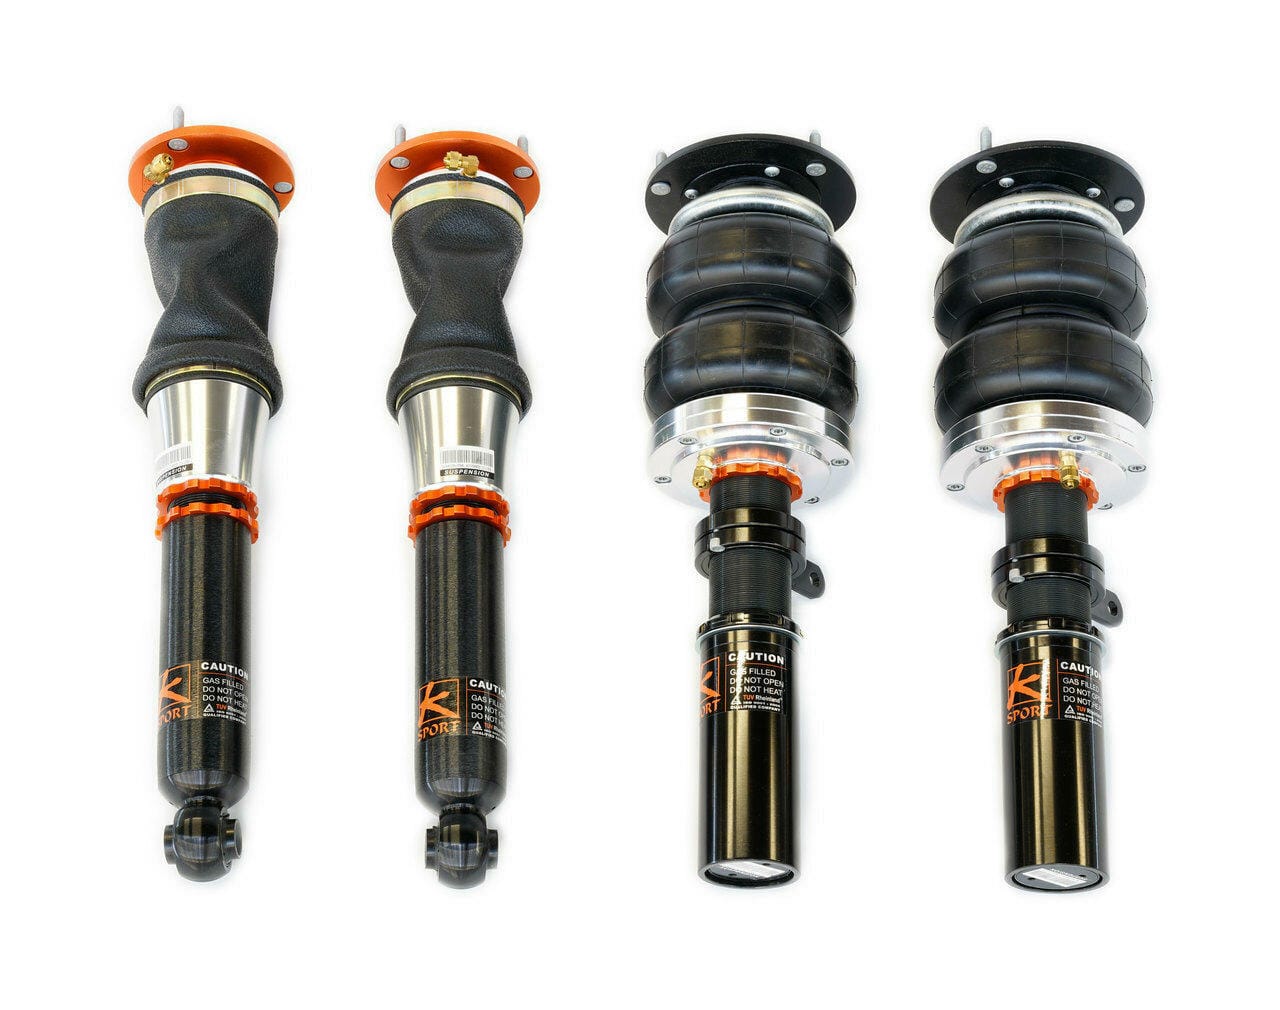 Ksport Airtech Air Suspension System (Struts Only) - 1993-2001 Nissan Altima CNS020-ASO